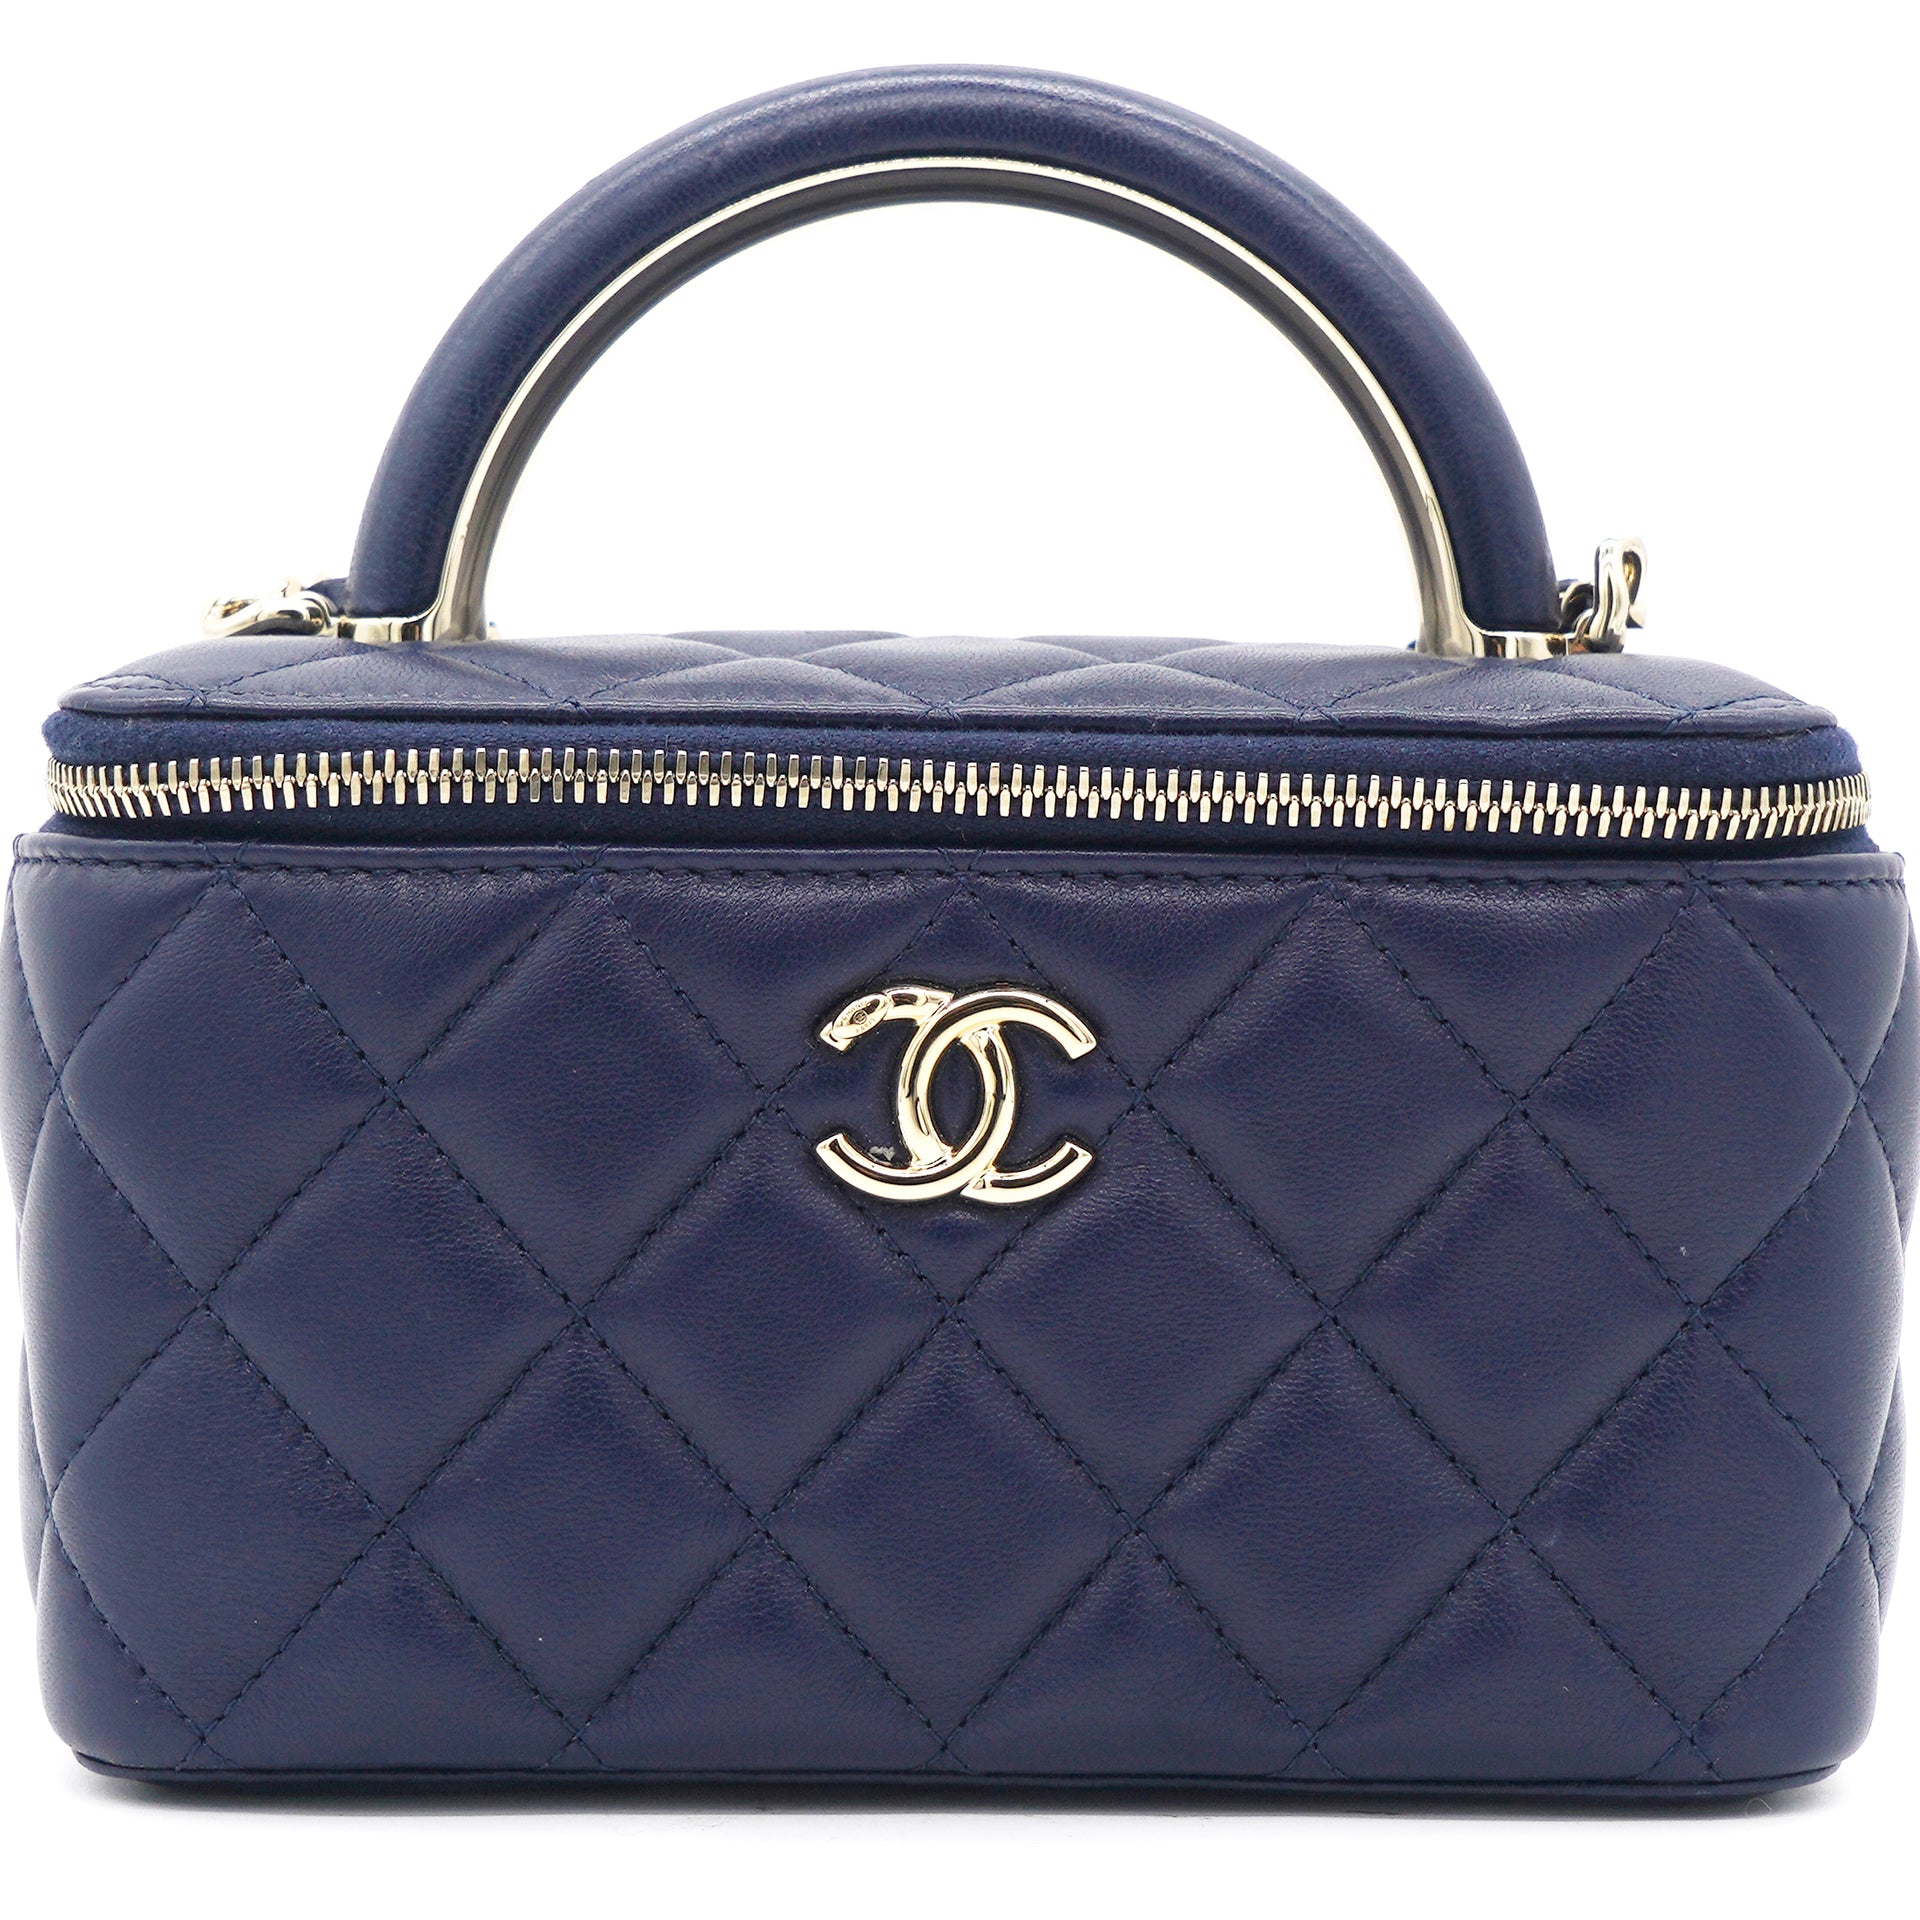 chanel navy tote